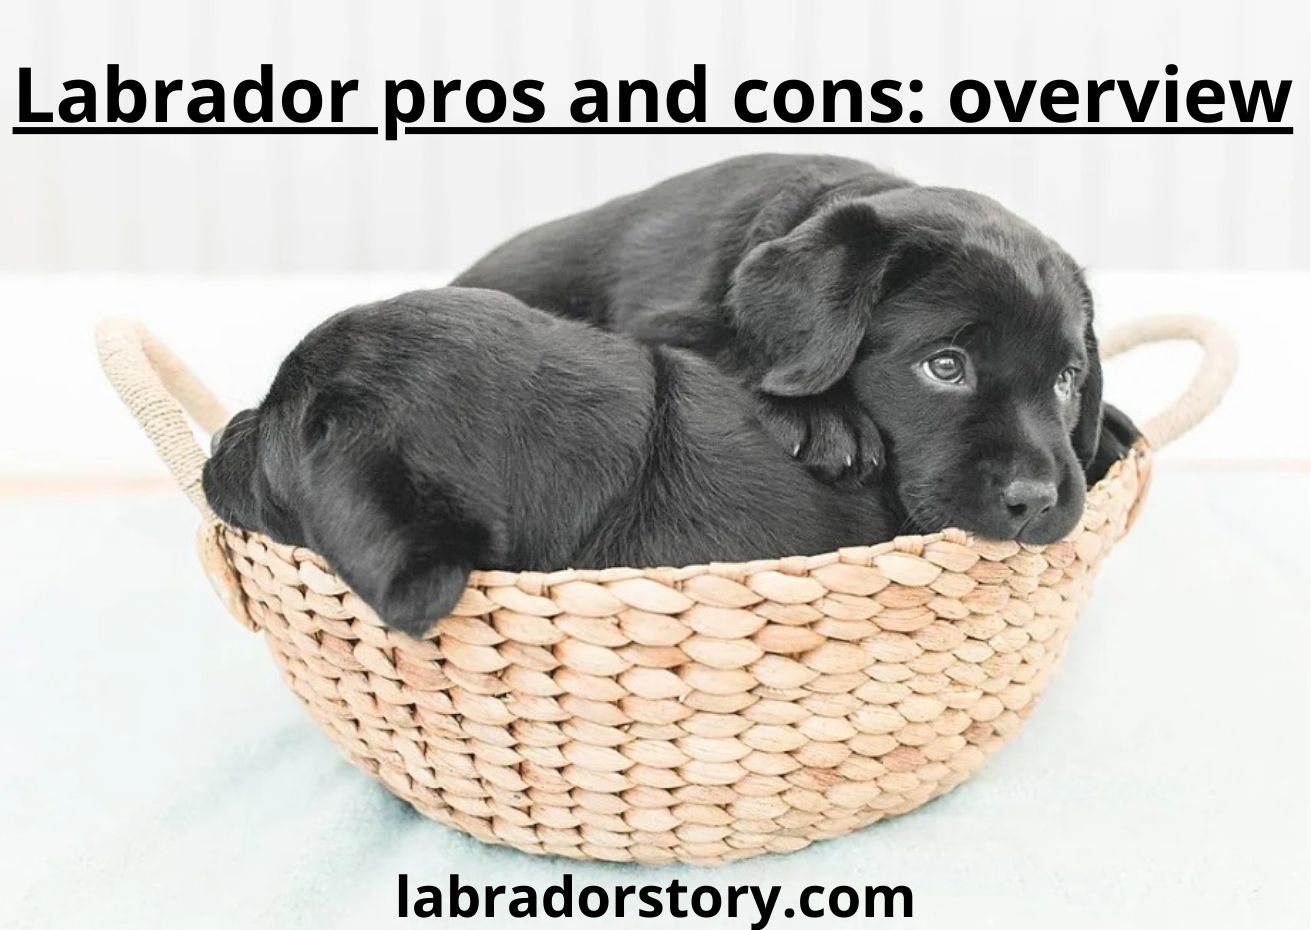 15 Labrador pros and cons: the best overview